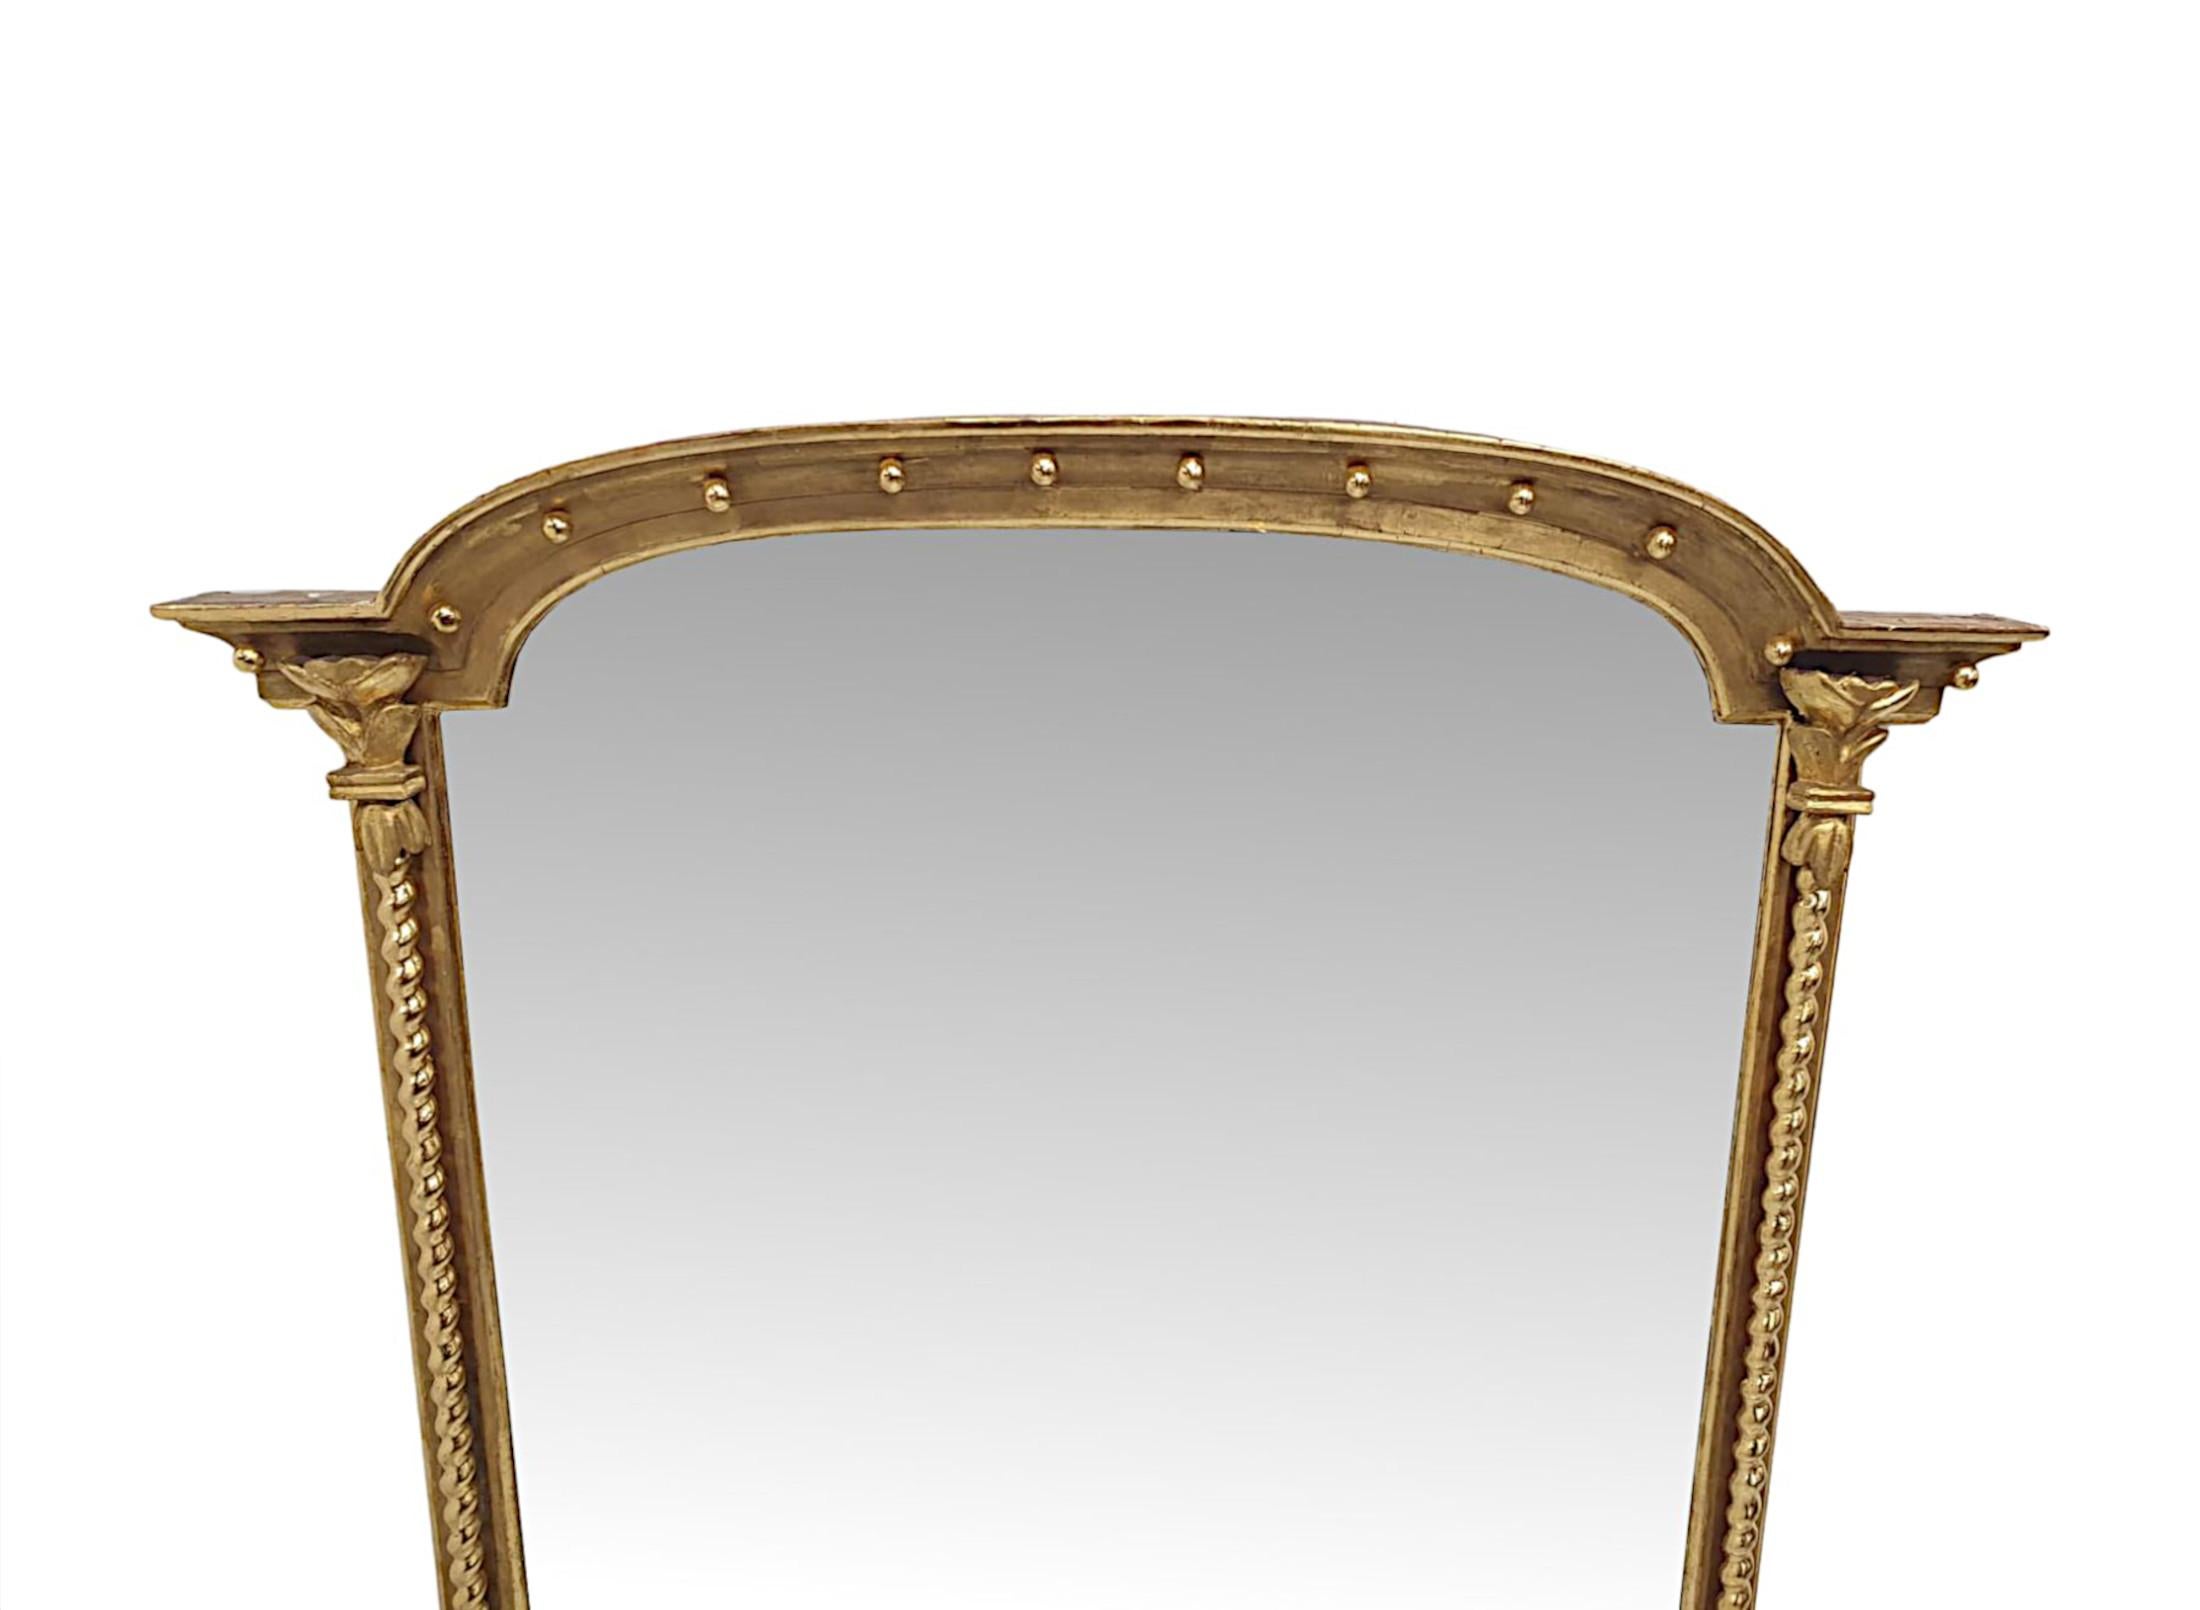 A stunning 19th Century giltwood overmantle mirrorof fabulous quality.  The mirror glass plate of shaped rectangular form set within a finely hand carved, moulded giltwood frame surmounted with fluted and curved architectural overhanging pediment